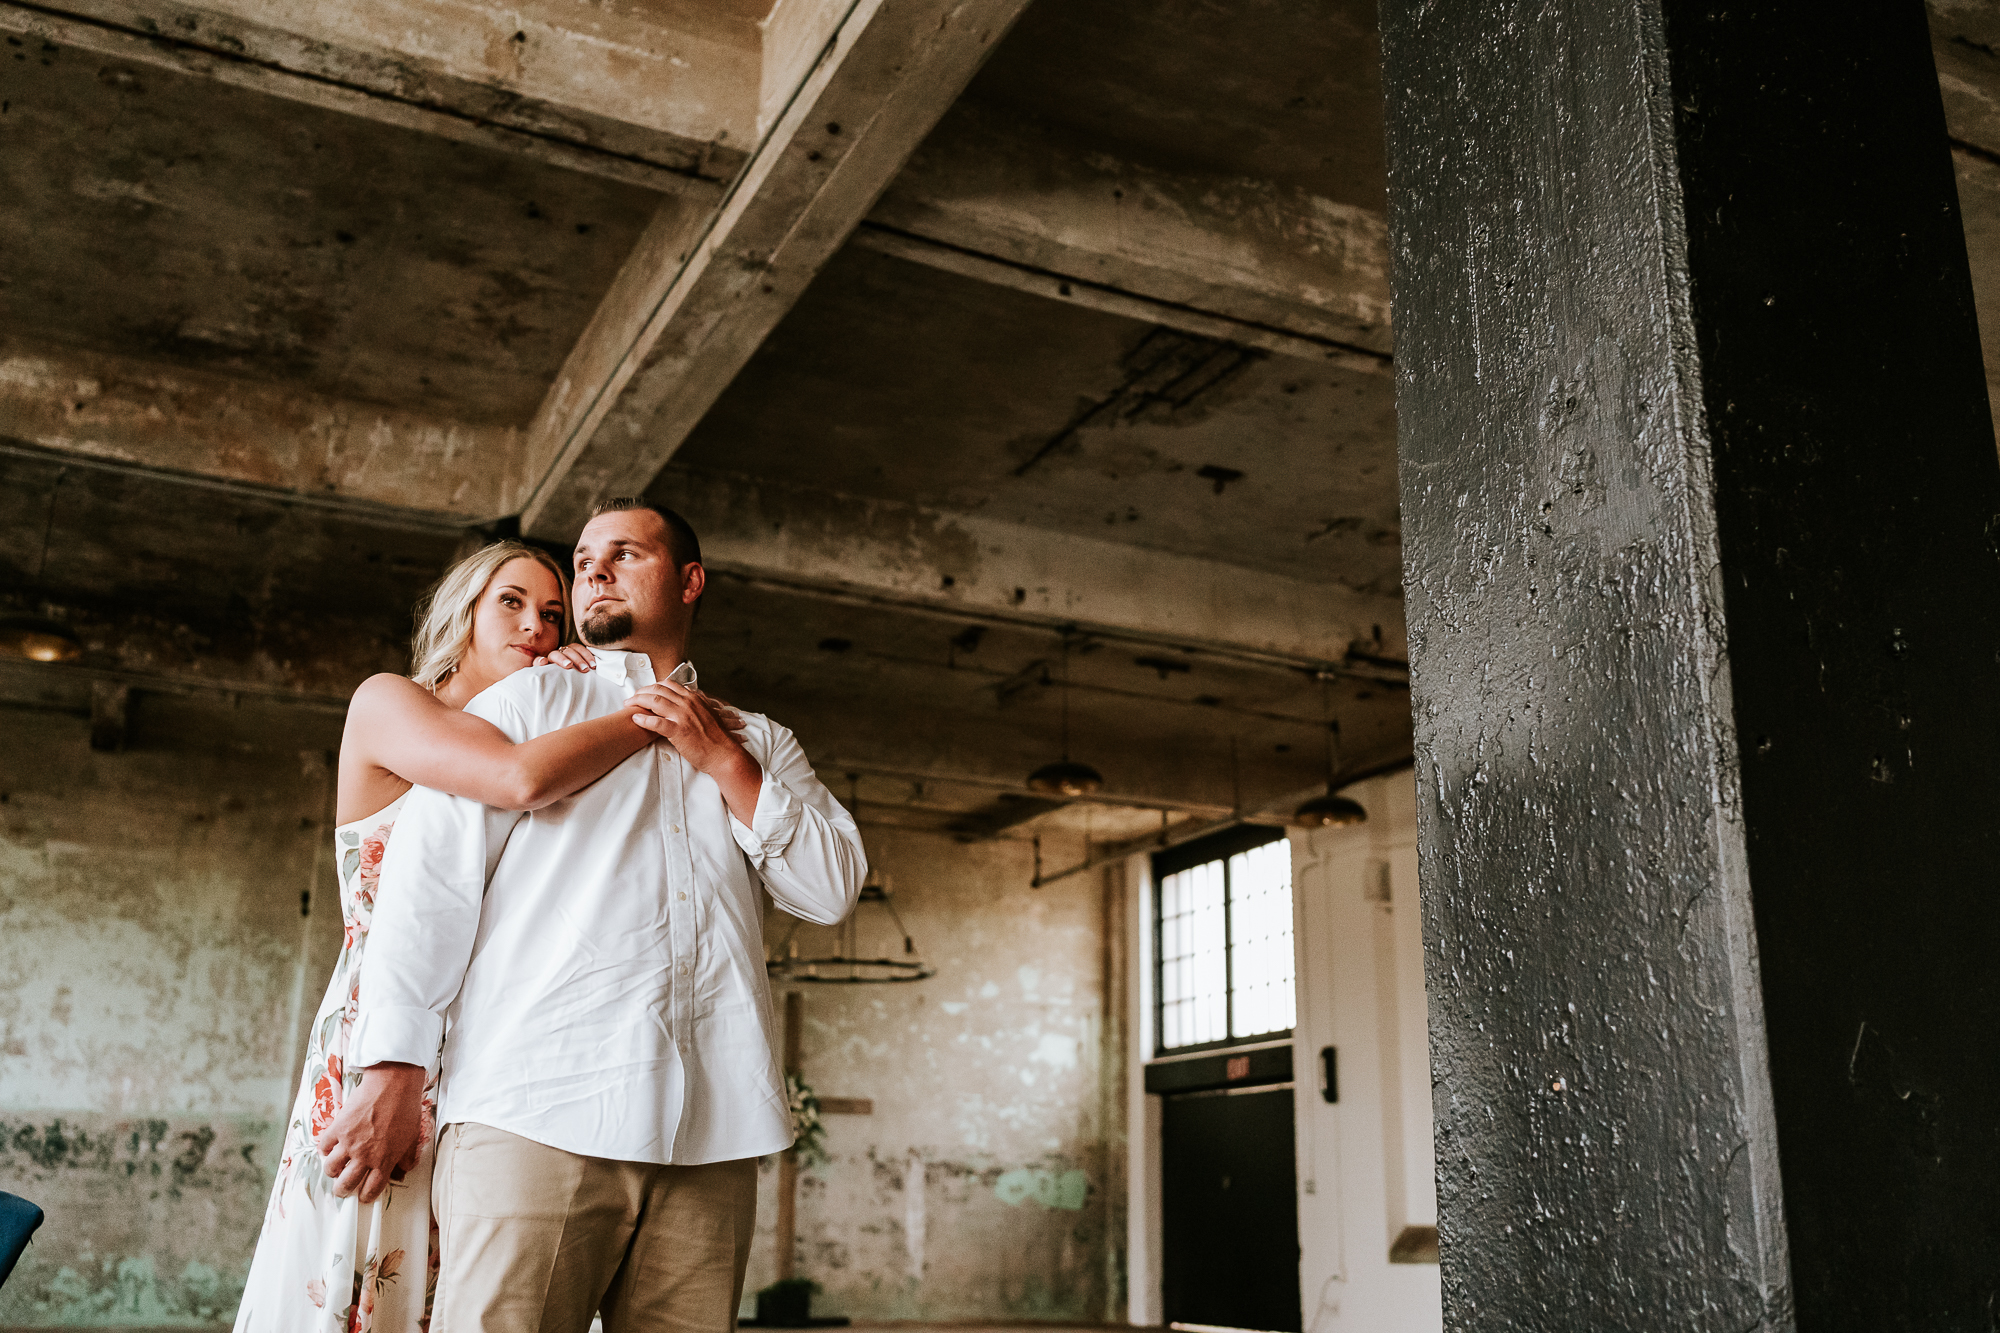 Jessica & Matt engagement session in a abandoned building